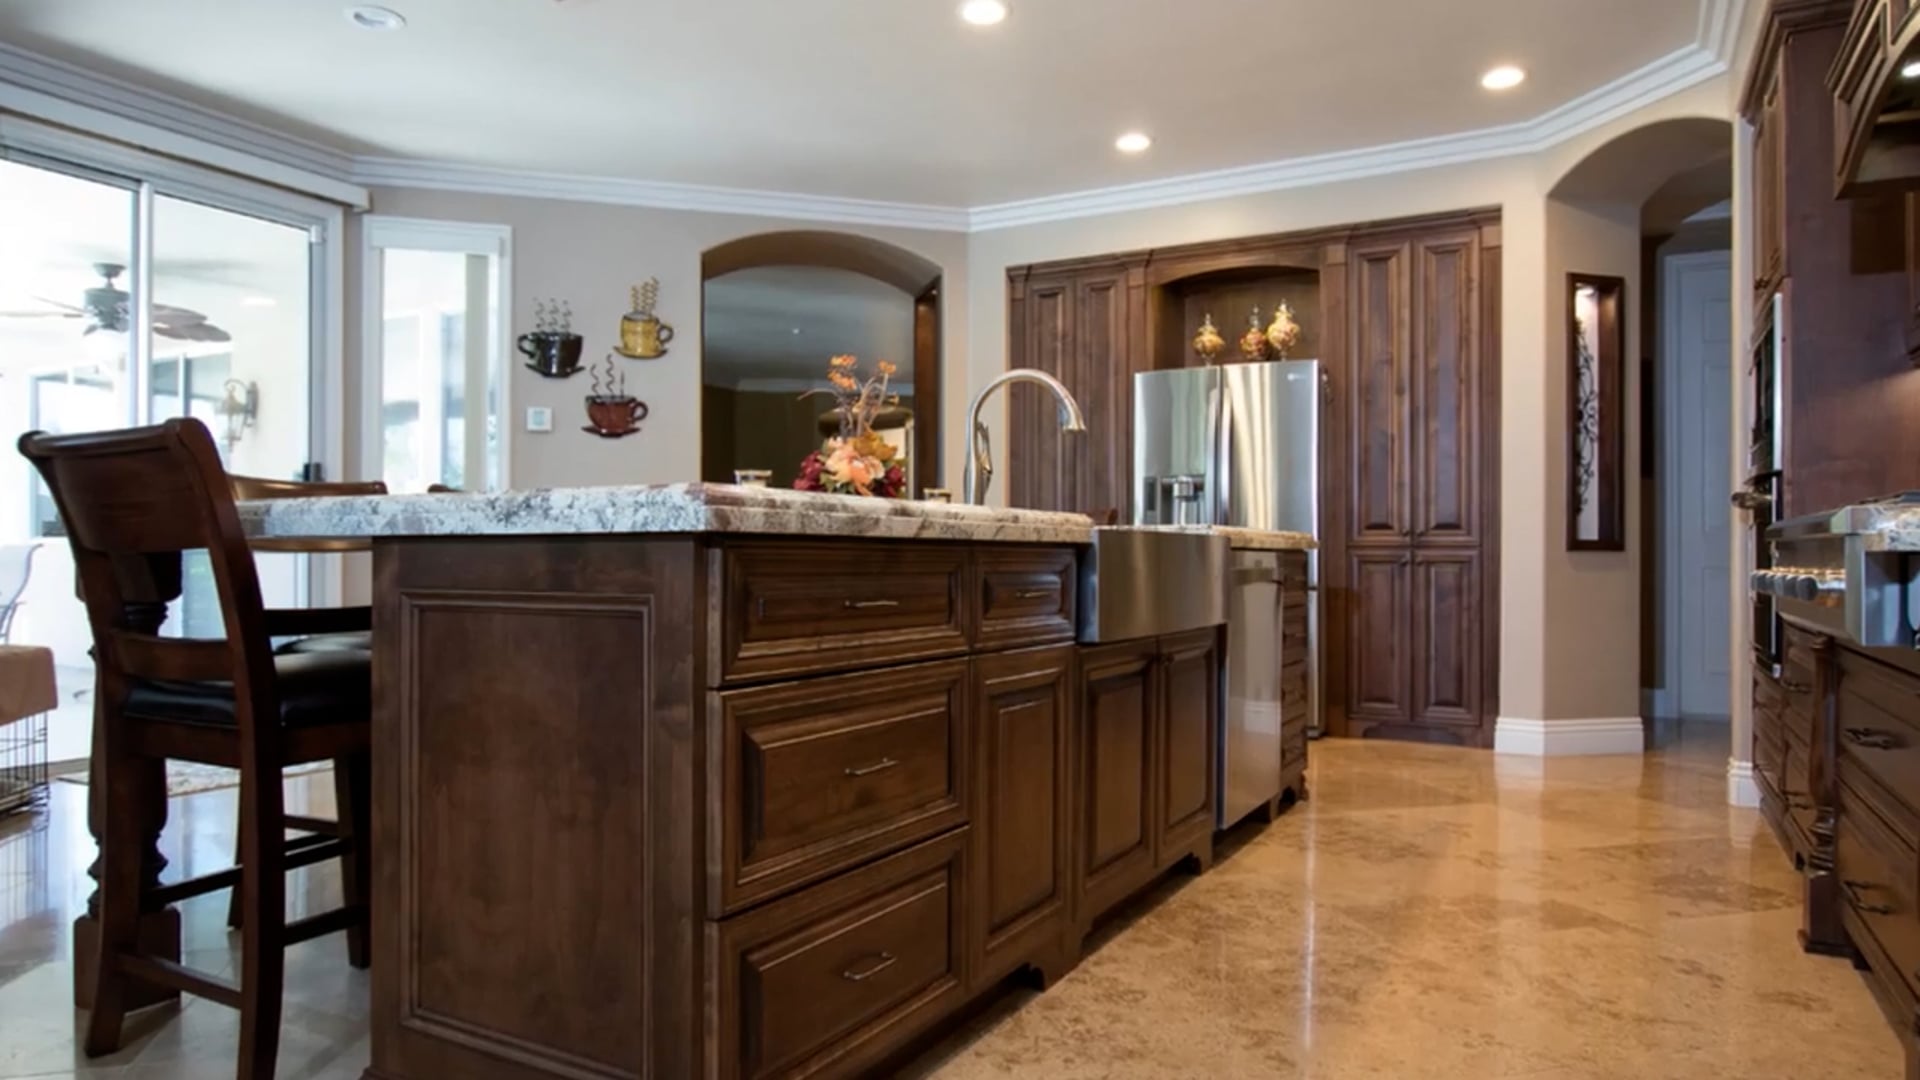 The Aesthetic Impact of Cabinets - East Coast Construction SD